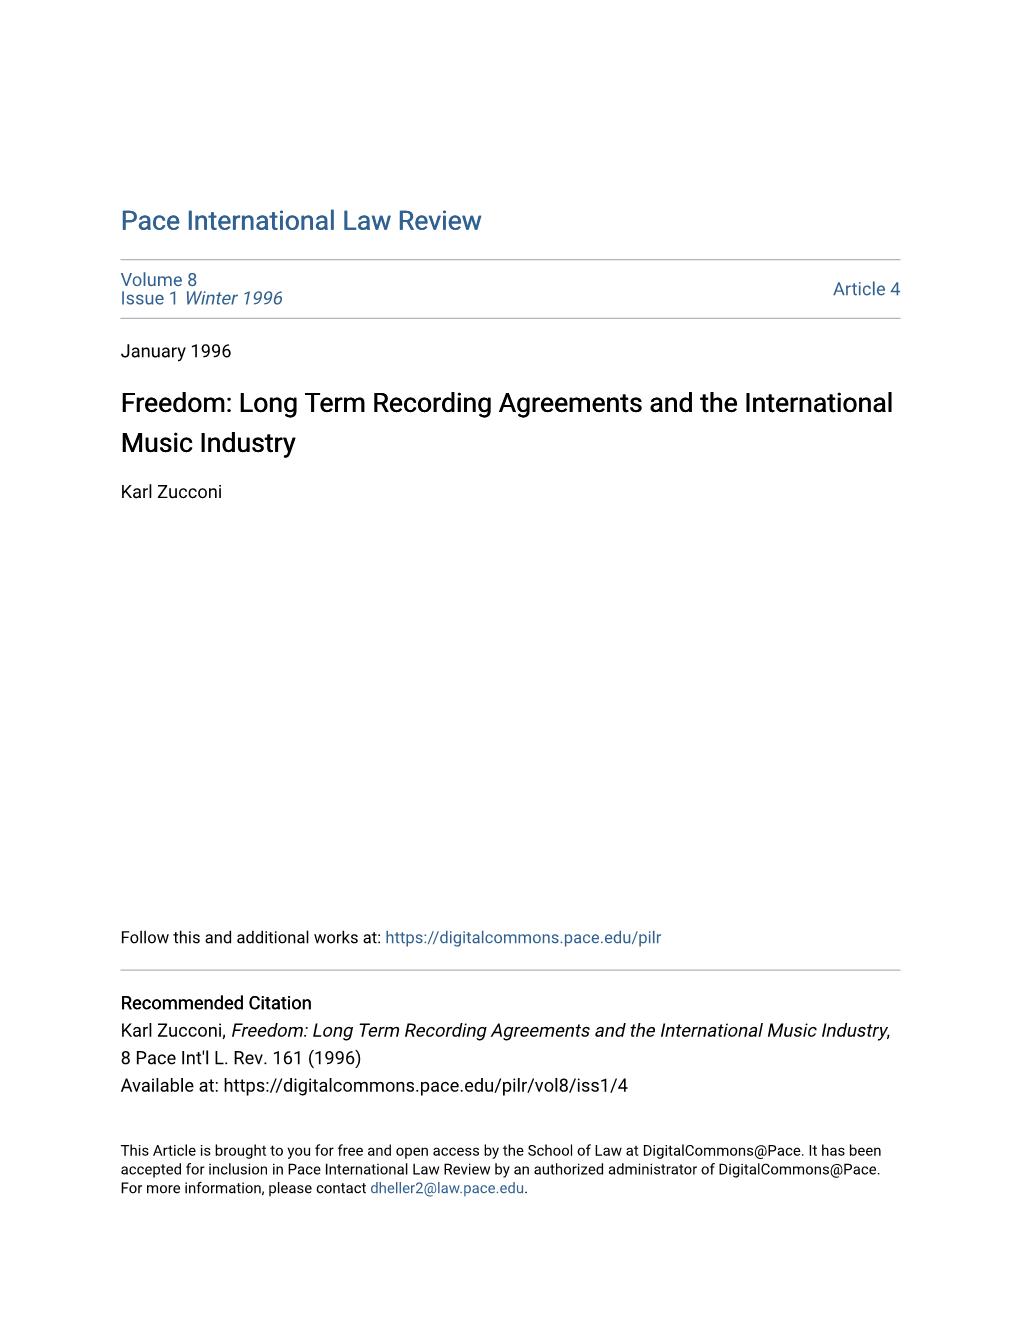 Long Term Recording Agreements and the International Music Industry